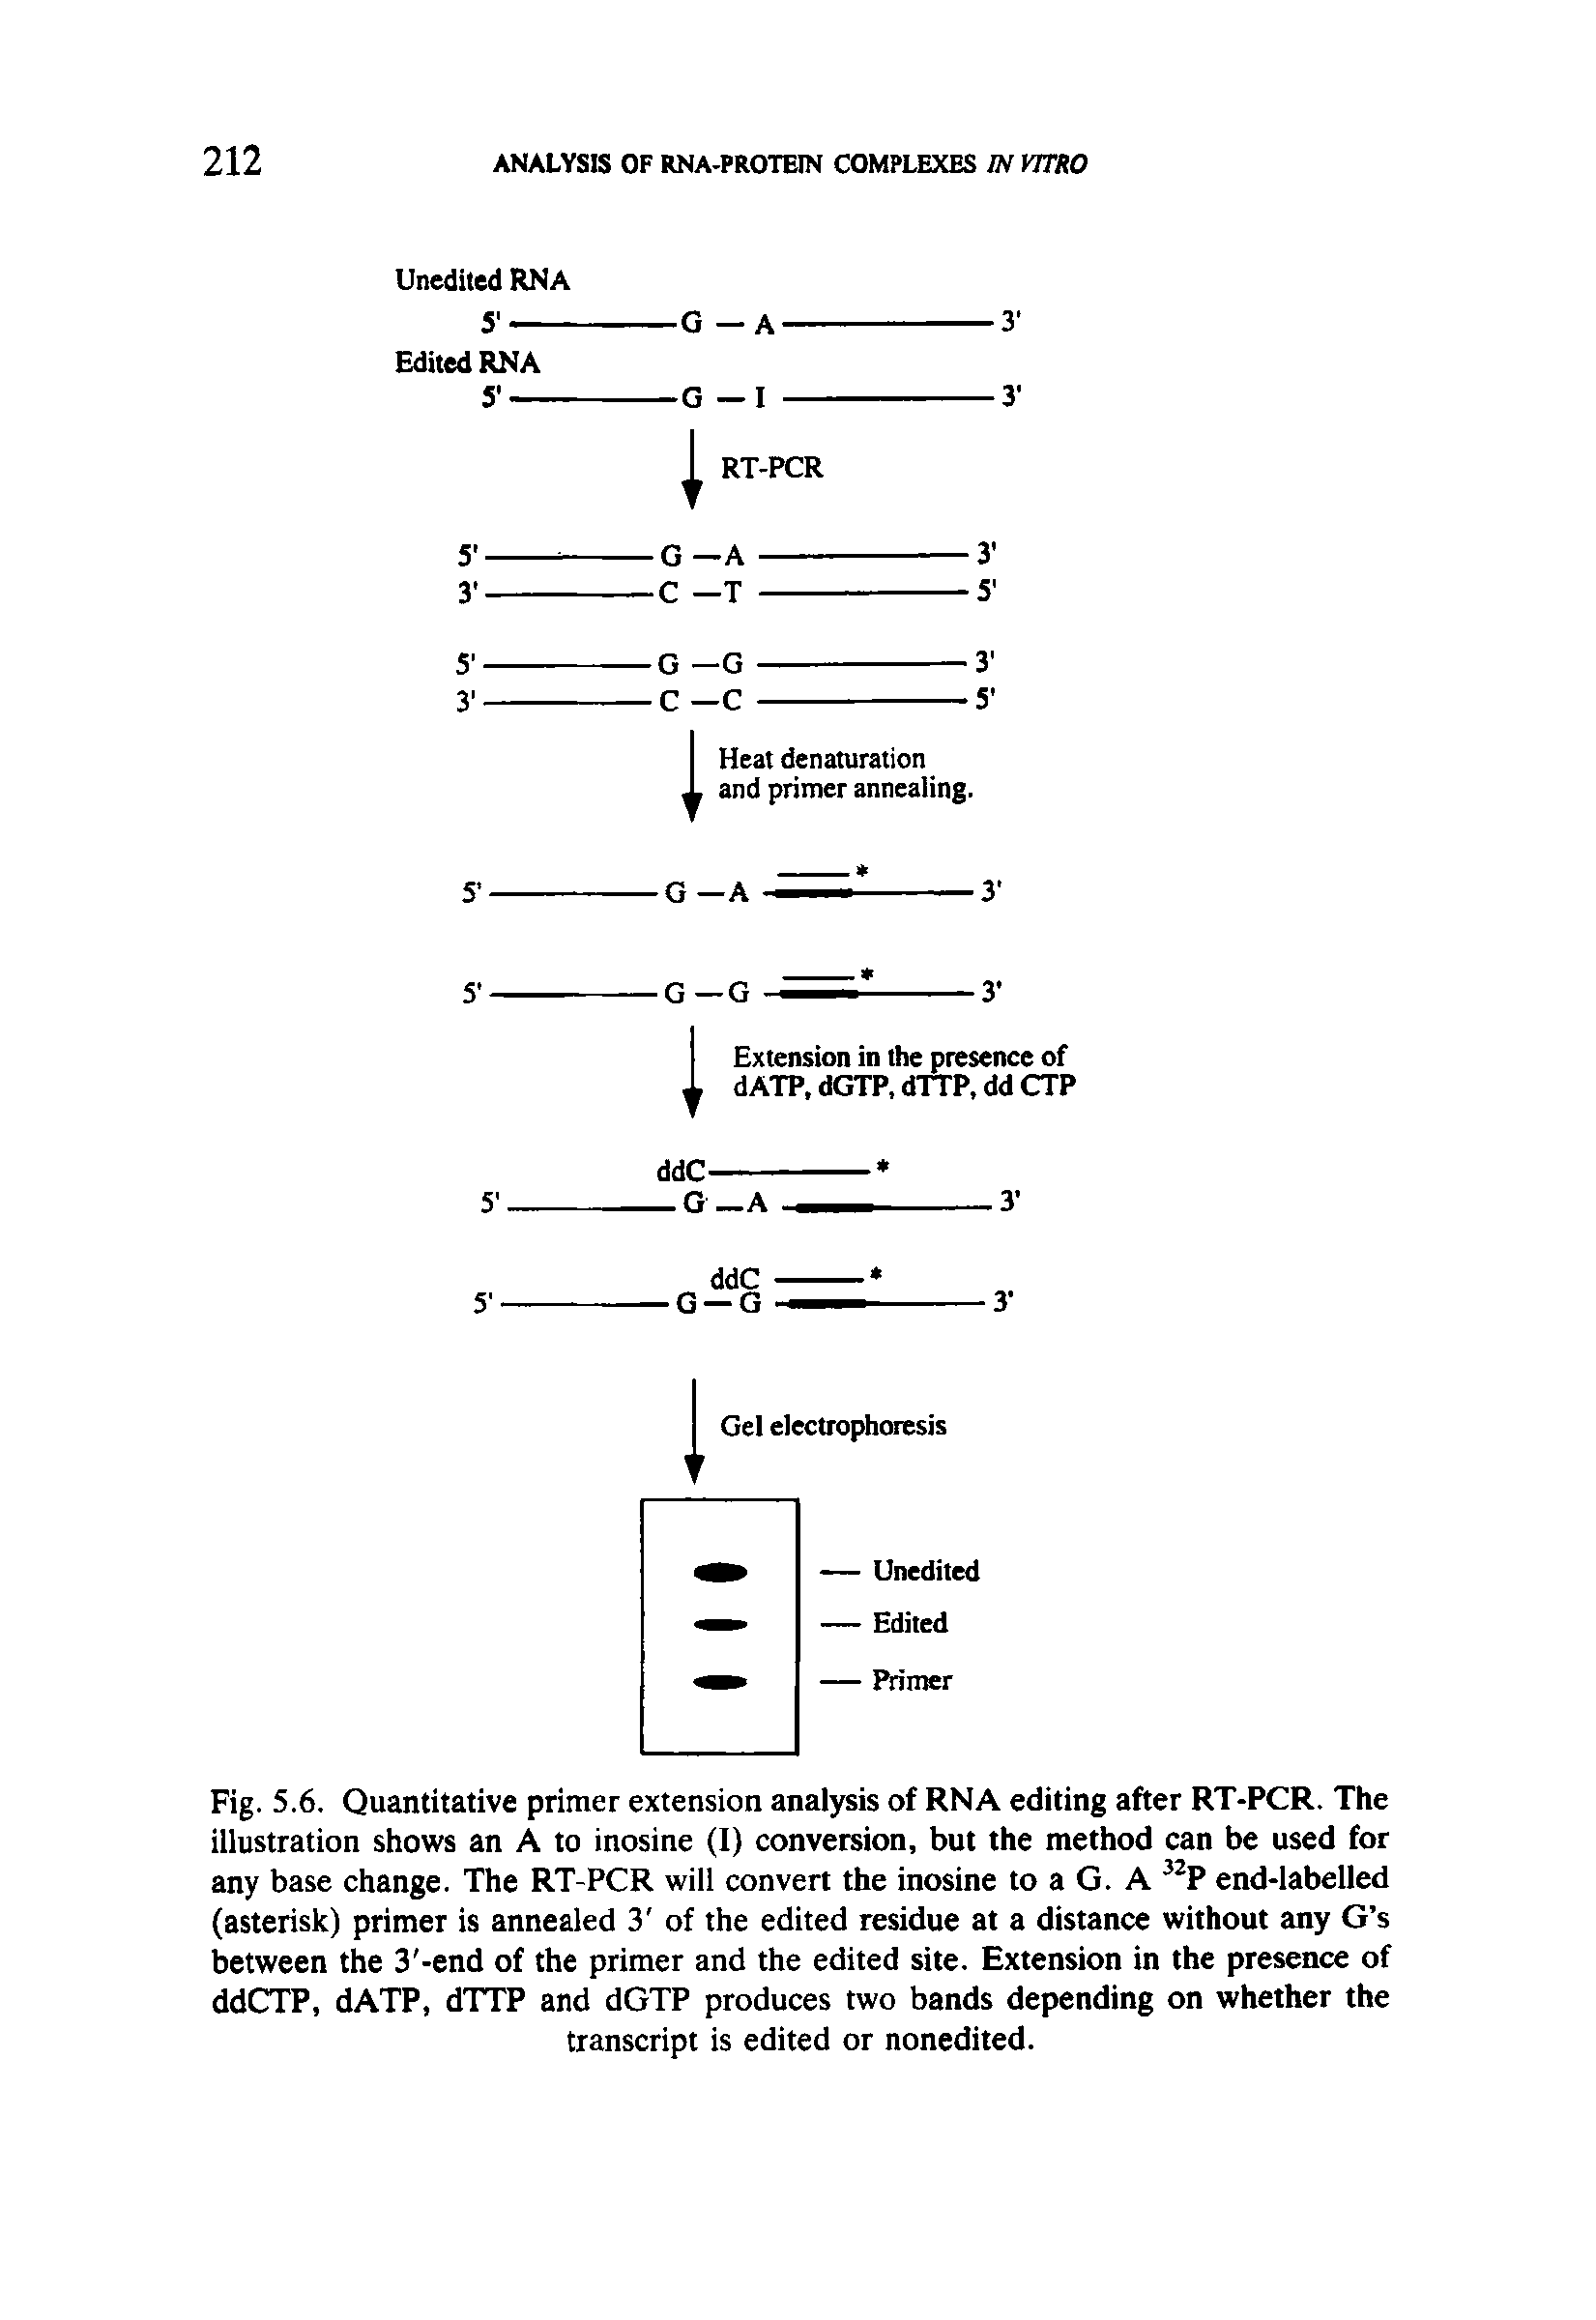 Fig. 5.6. Quantitative primer extension analysis of RNA editing after RT-PCR. The illustration shows an A to inosine (I) conversion, but the method can be used for any base change. The RT-PCR will convert the inosine to a G. A 32P end-labelled (asterisk) primer is annealed 3 of the edited residue at a distance without any G s between the 3 -end of the primer and the edited site. Extension in the presence of ddCTP, dATP, dTTP and dGTP produces two bands depending on whether the transcript is edited or nonedited.